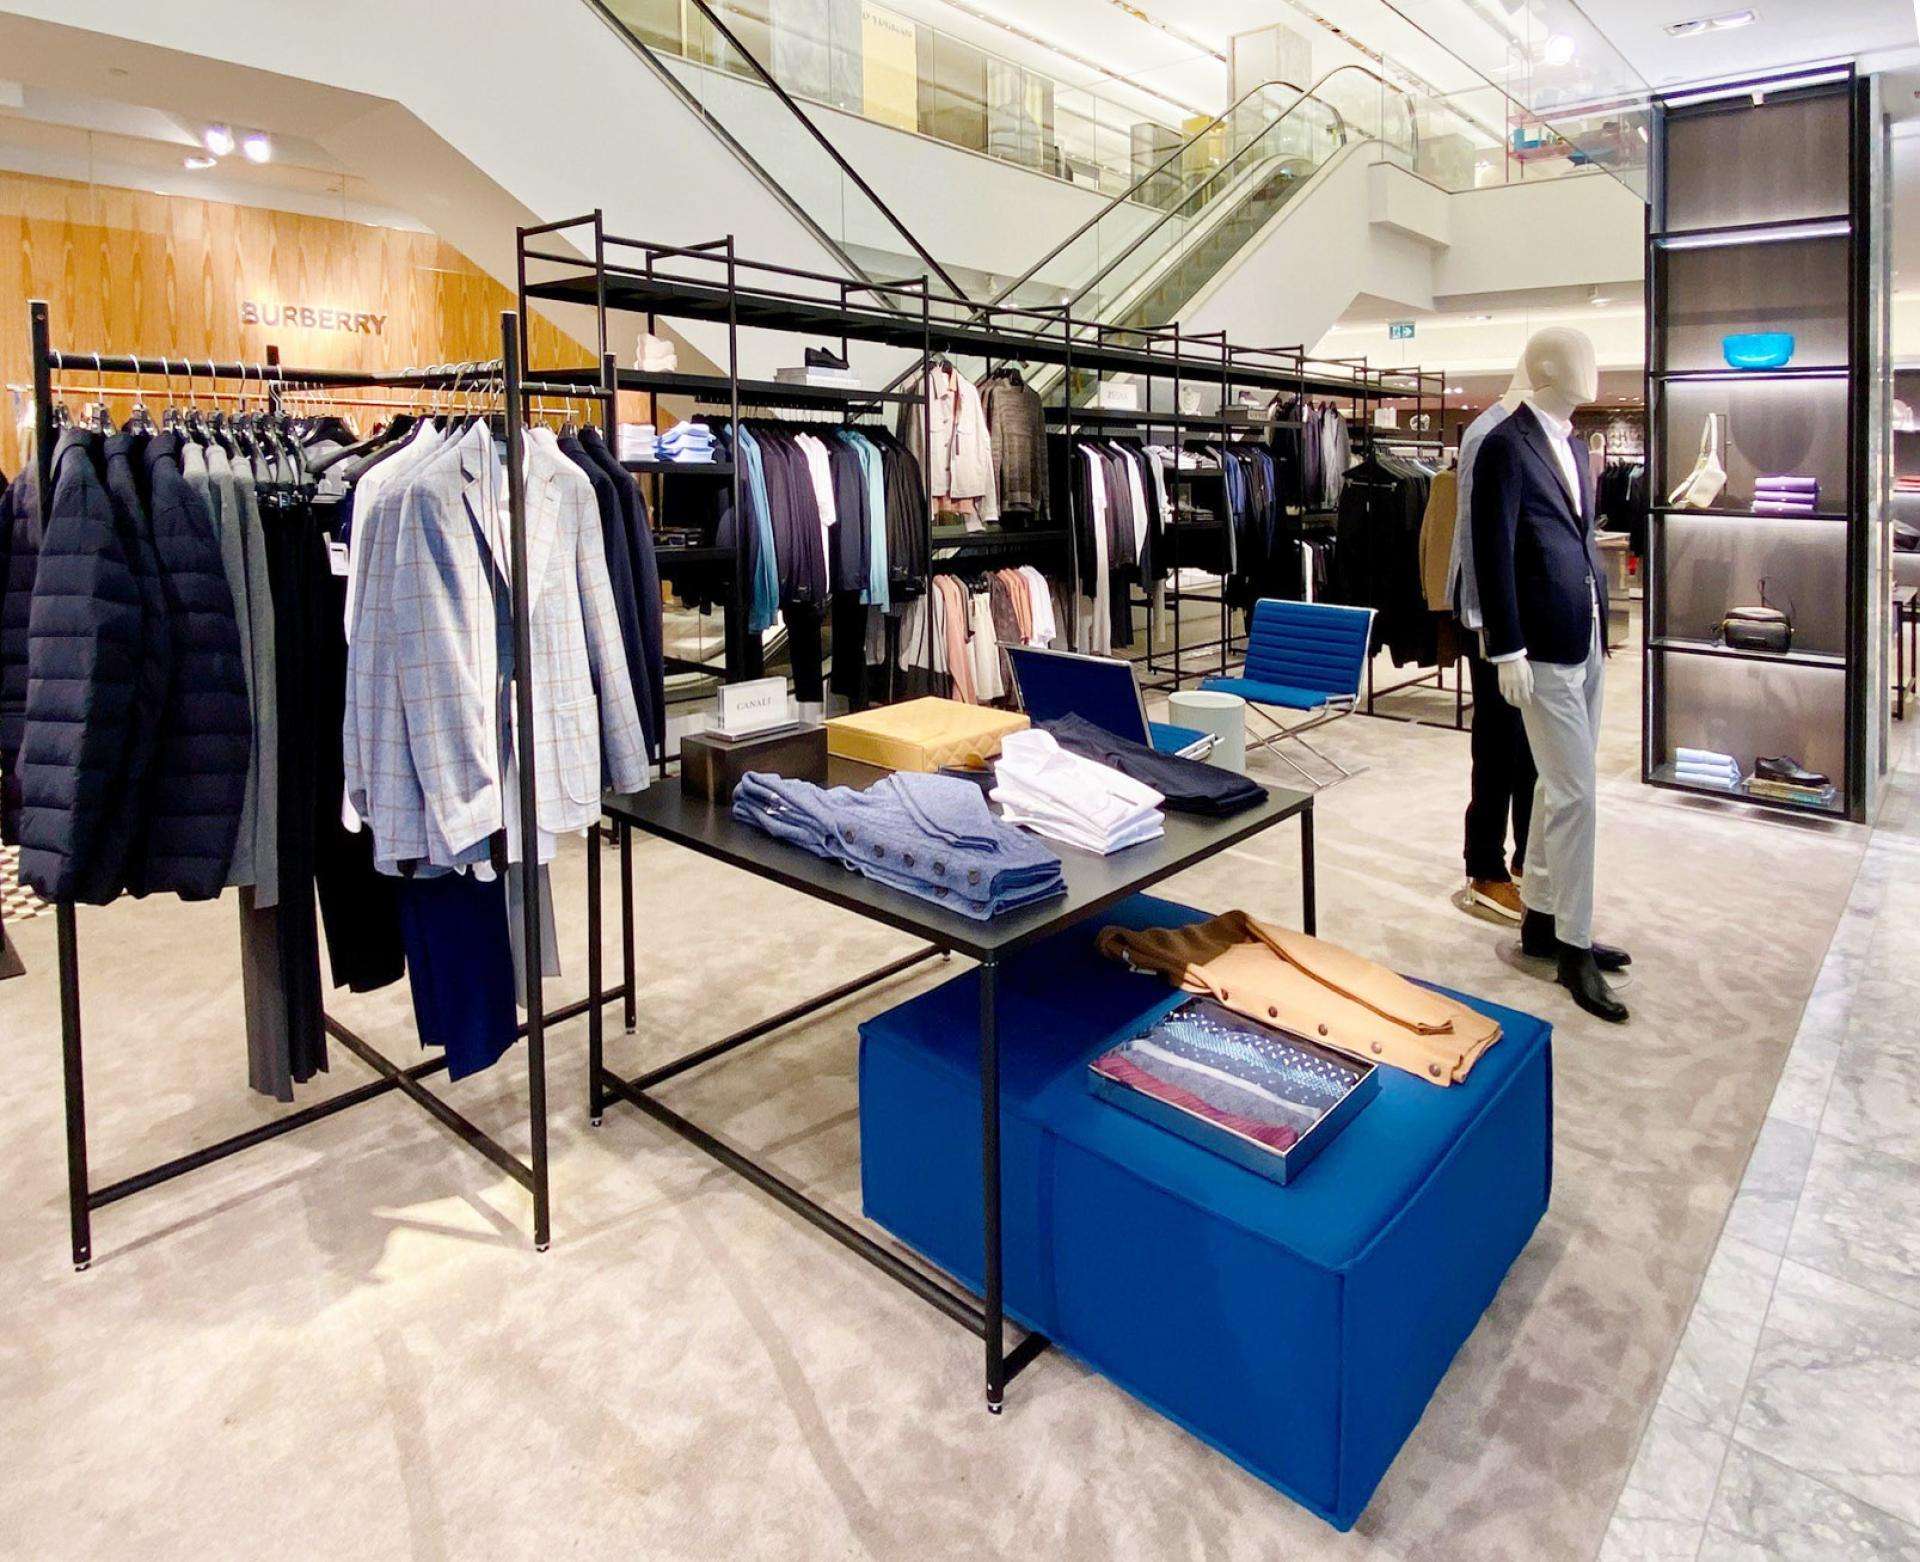 Holt Renfrew Opens Luxurious Free-Standing Men's Store [With Photos]